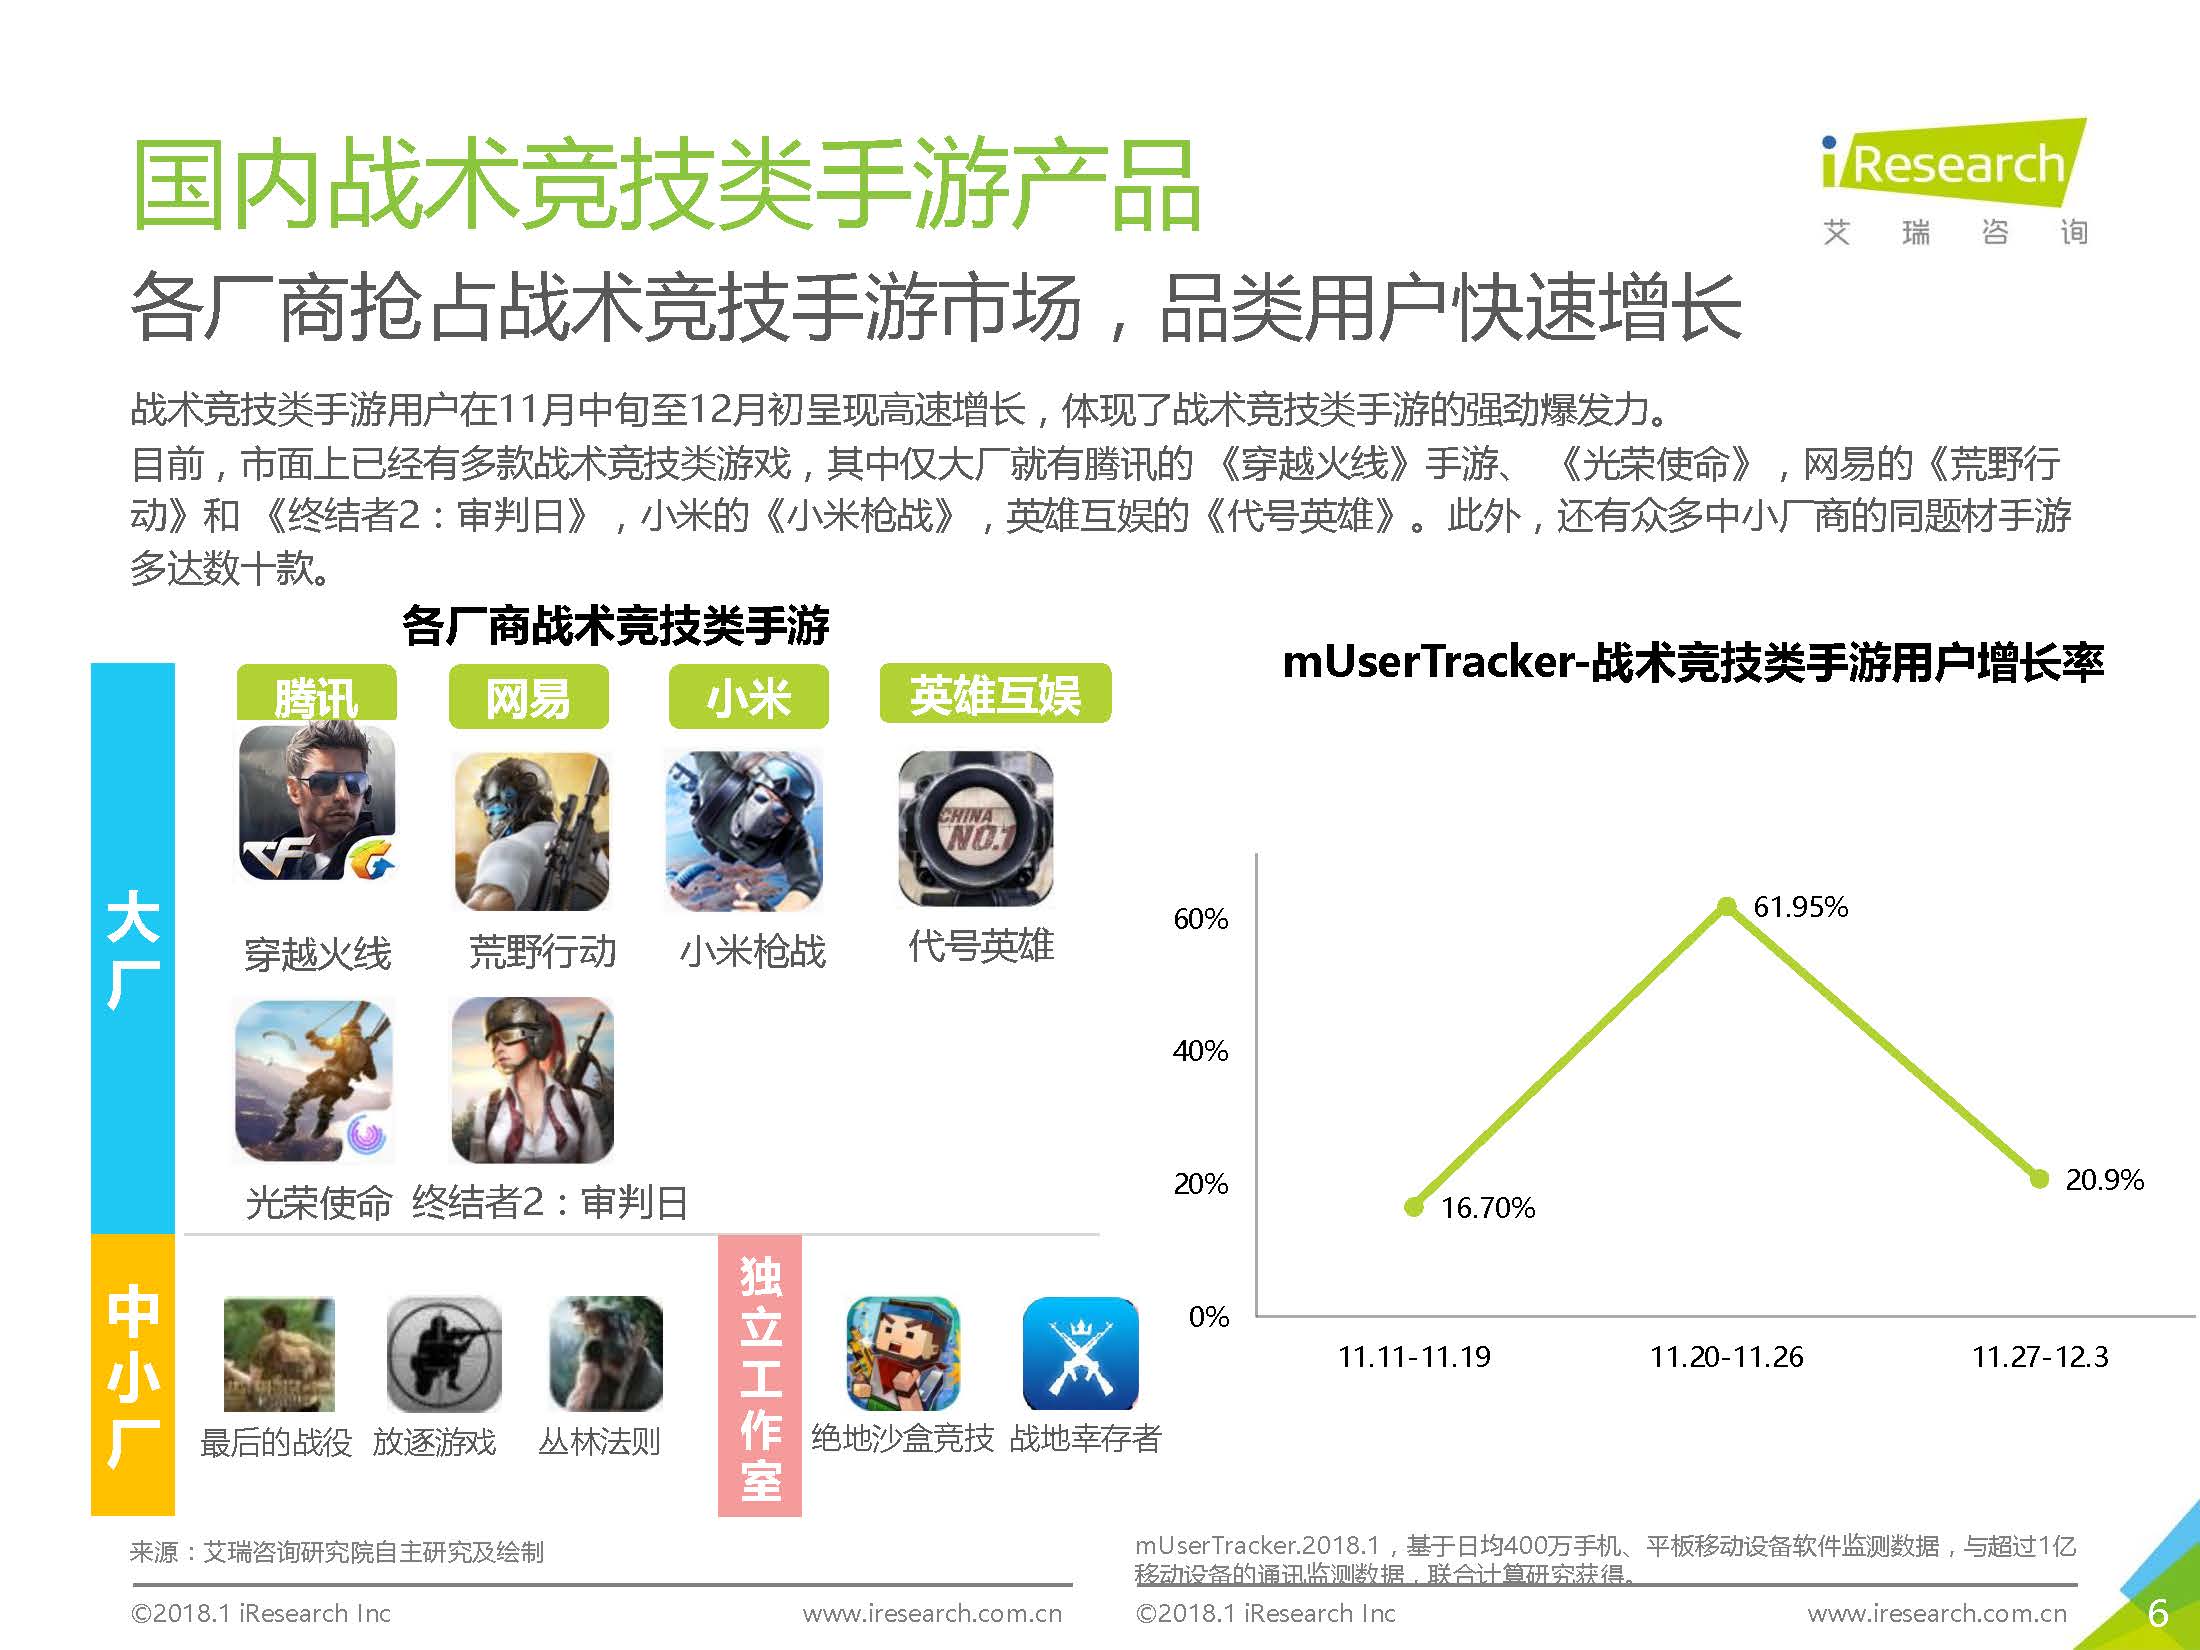 Cross border e-commerce iResearch: insight into the mobile game market of tactical sports